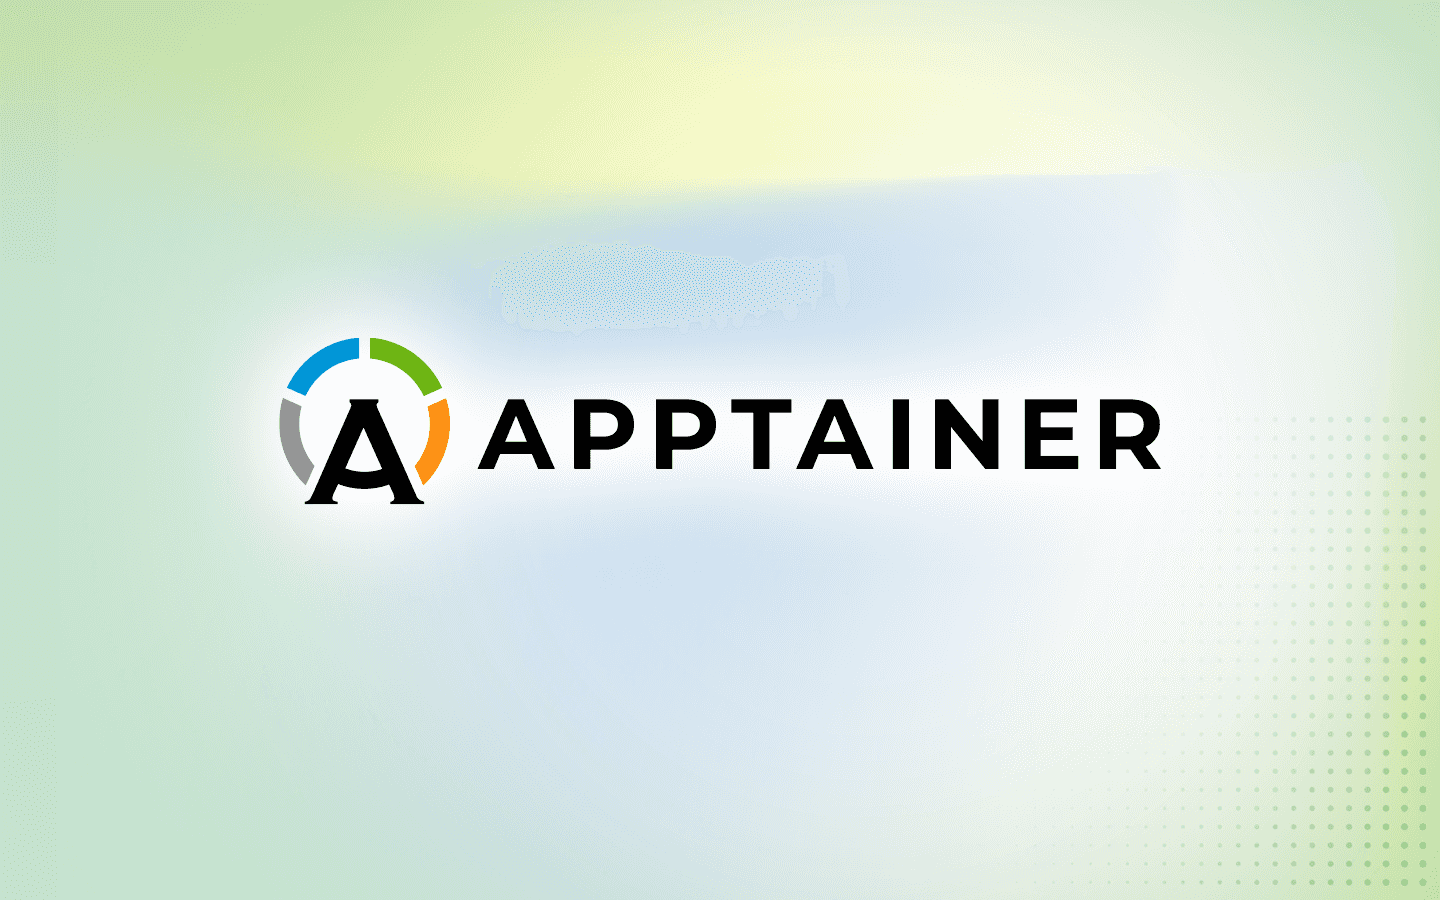 You Asked, We Answered: FAQs About Apptainer